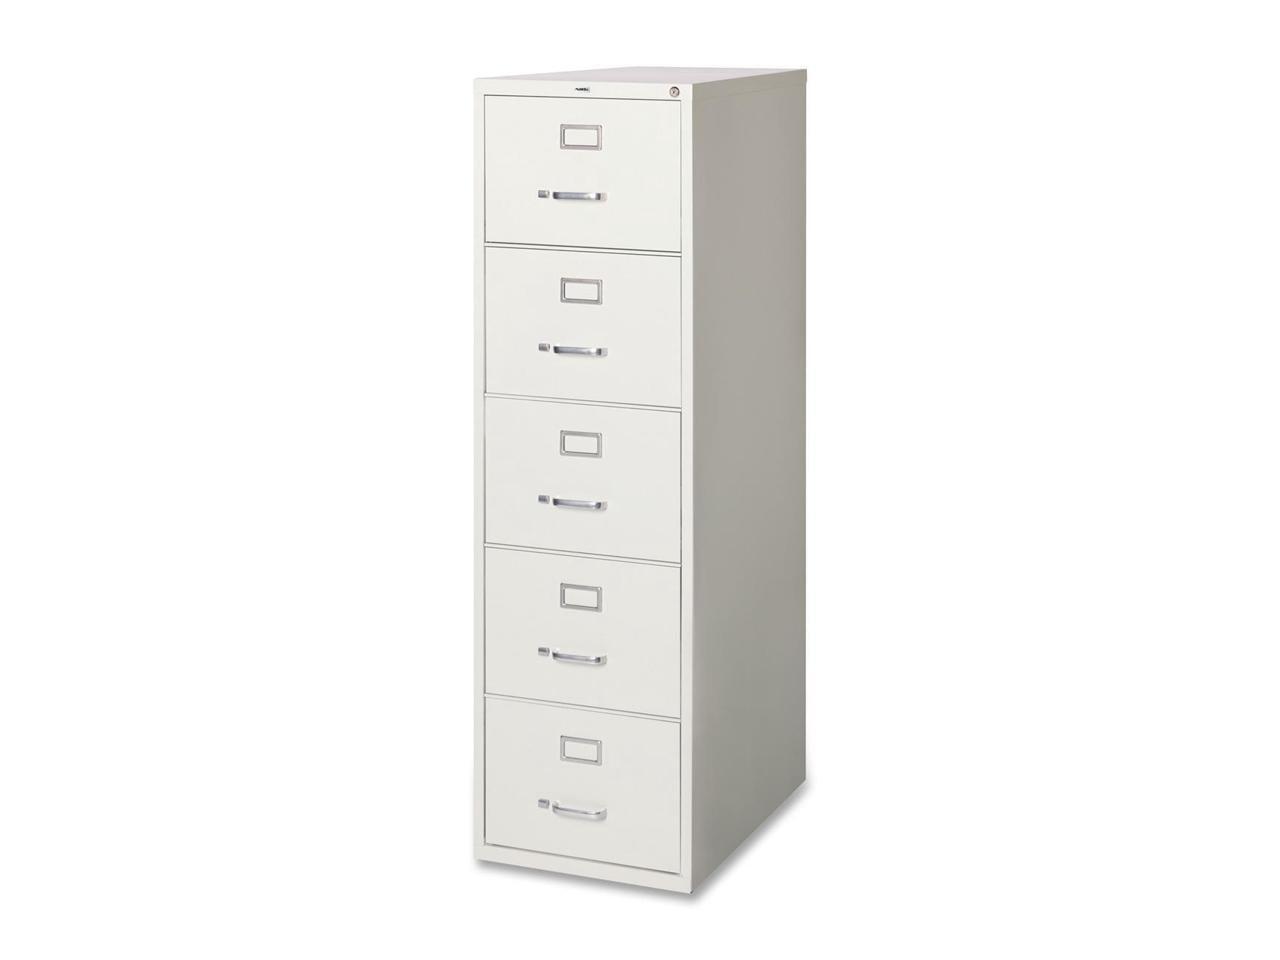 Lockable Legal Size 5-Drawer Steel File Cabinet in Light Gray